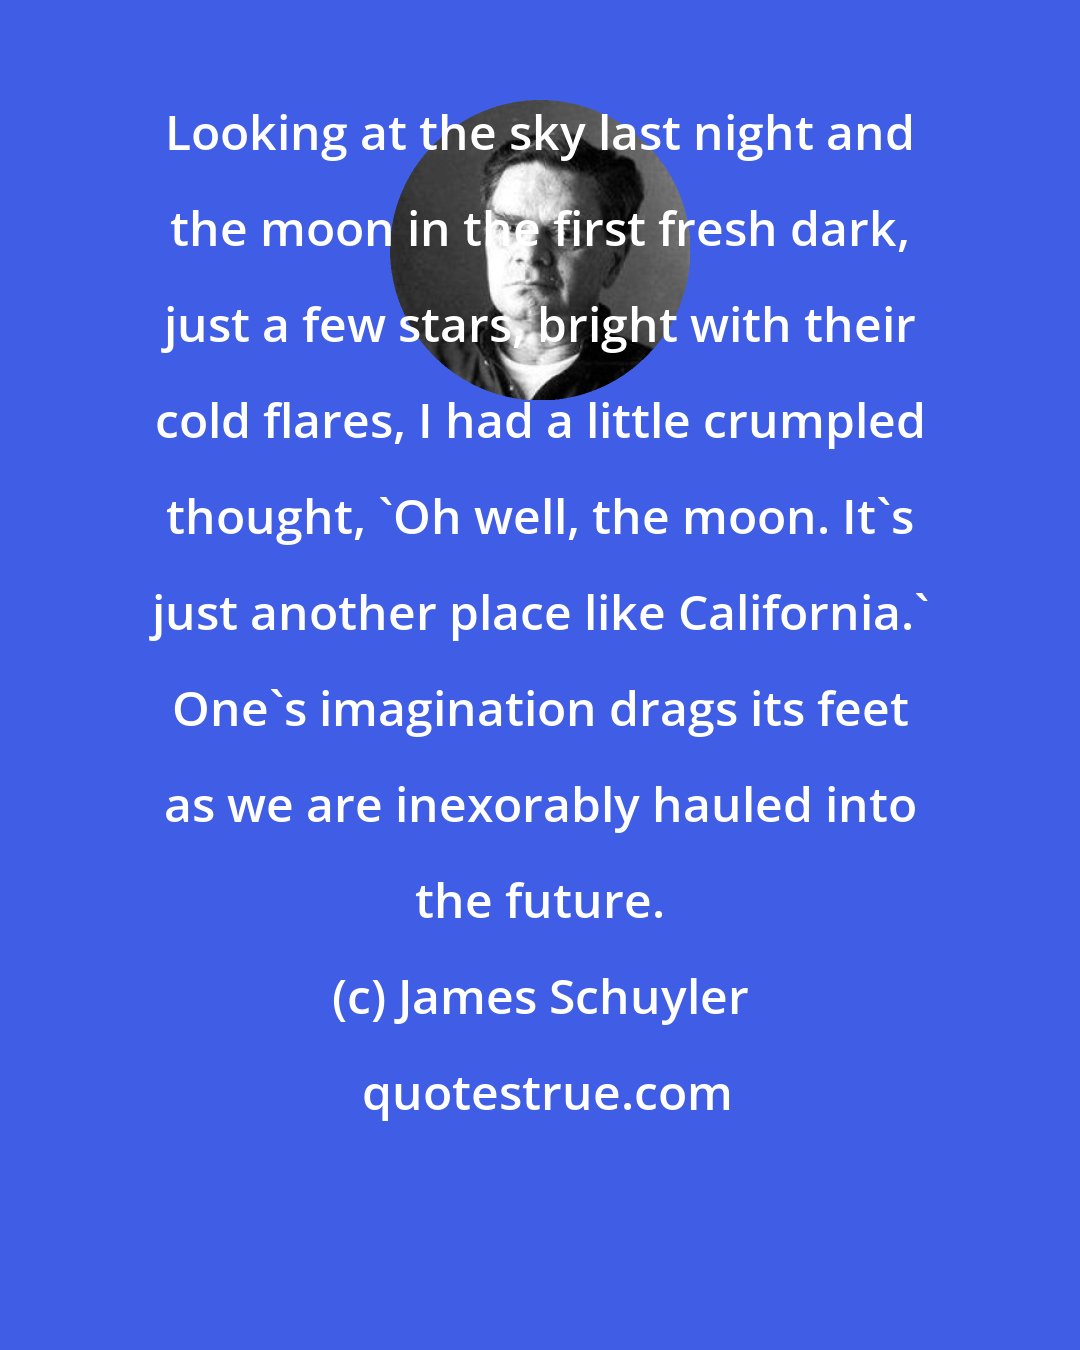 James Schuyler: Looking at the sky last night and the moon in the first fresh dark, just a few stars, bright with their cold flares, I had a little crumpled thought, 'Oh well, the moon. It's just another place like California.' One's imagination drags its feet as we are inexorably hauled into the future.